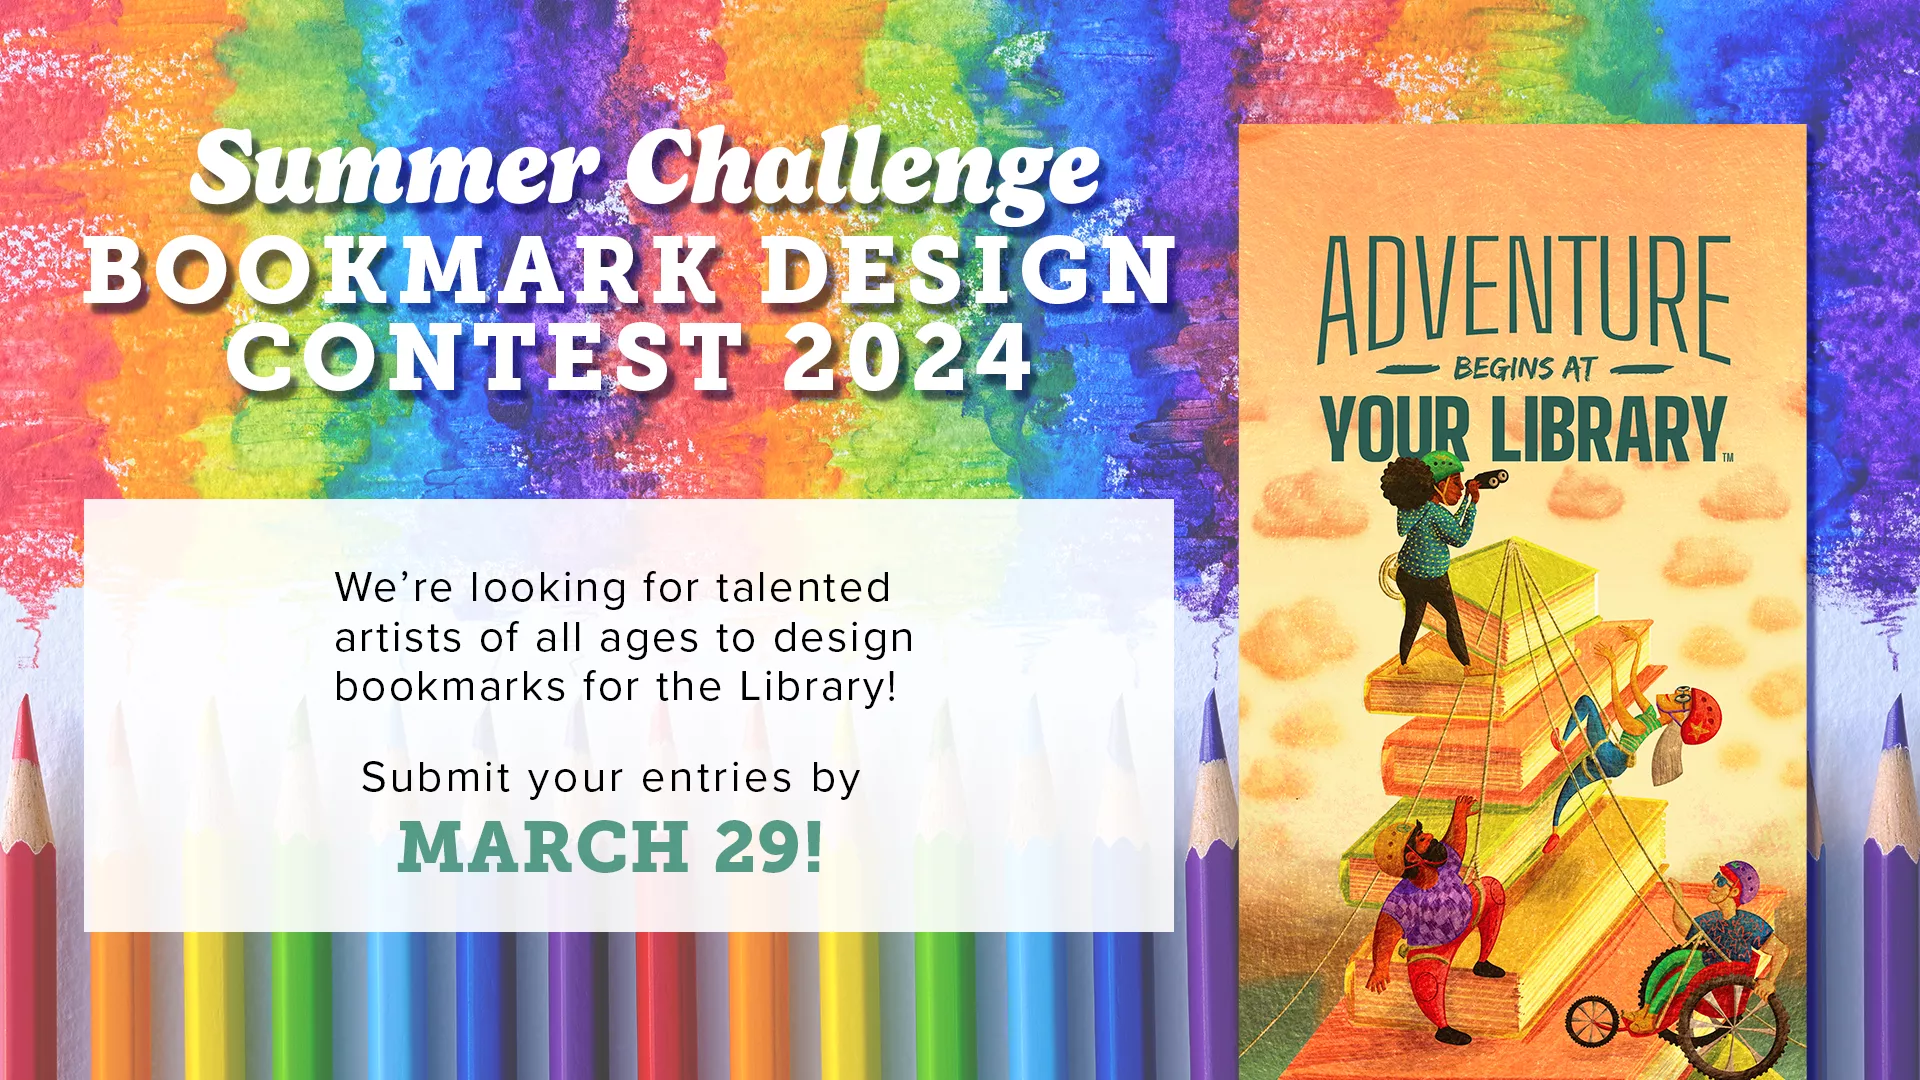 The Adventure Begins at your Library Summer Challenge Bookmark Contest